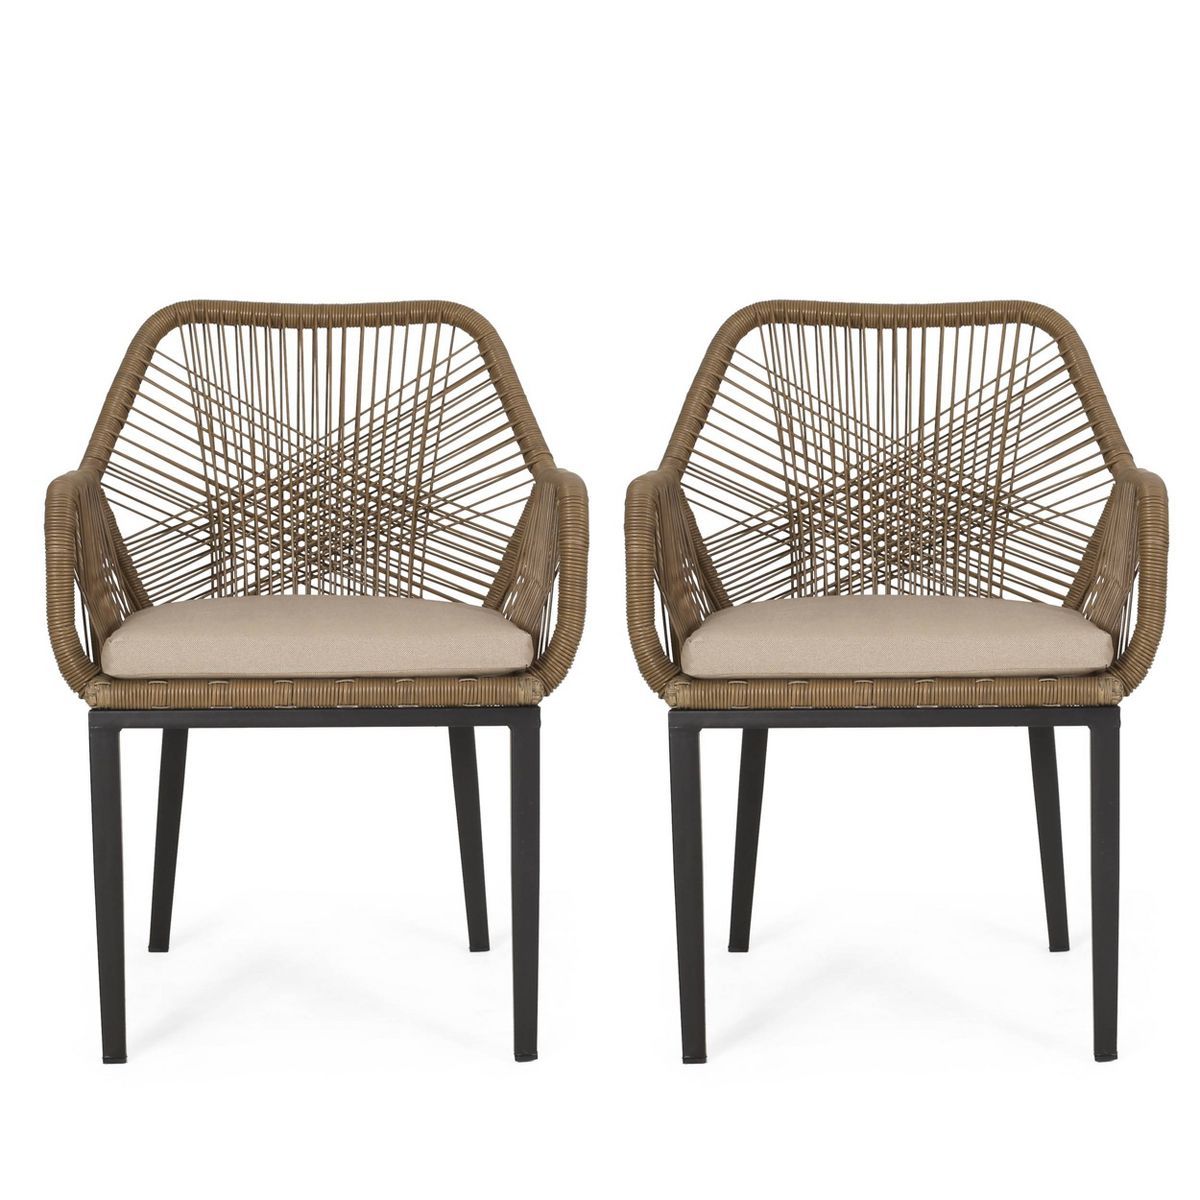 2pk Russel Outdoor Wicker Dining Chairs with Cushions Light Brown/Beige - Christopher Knight Home | Target